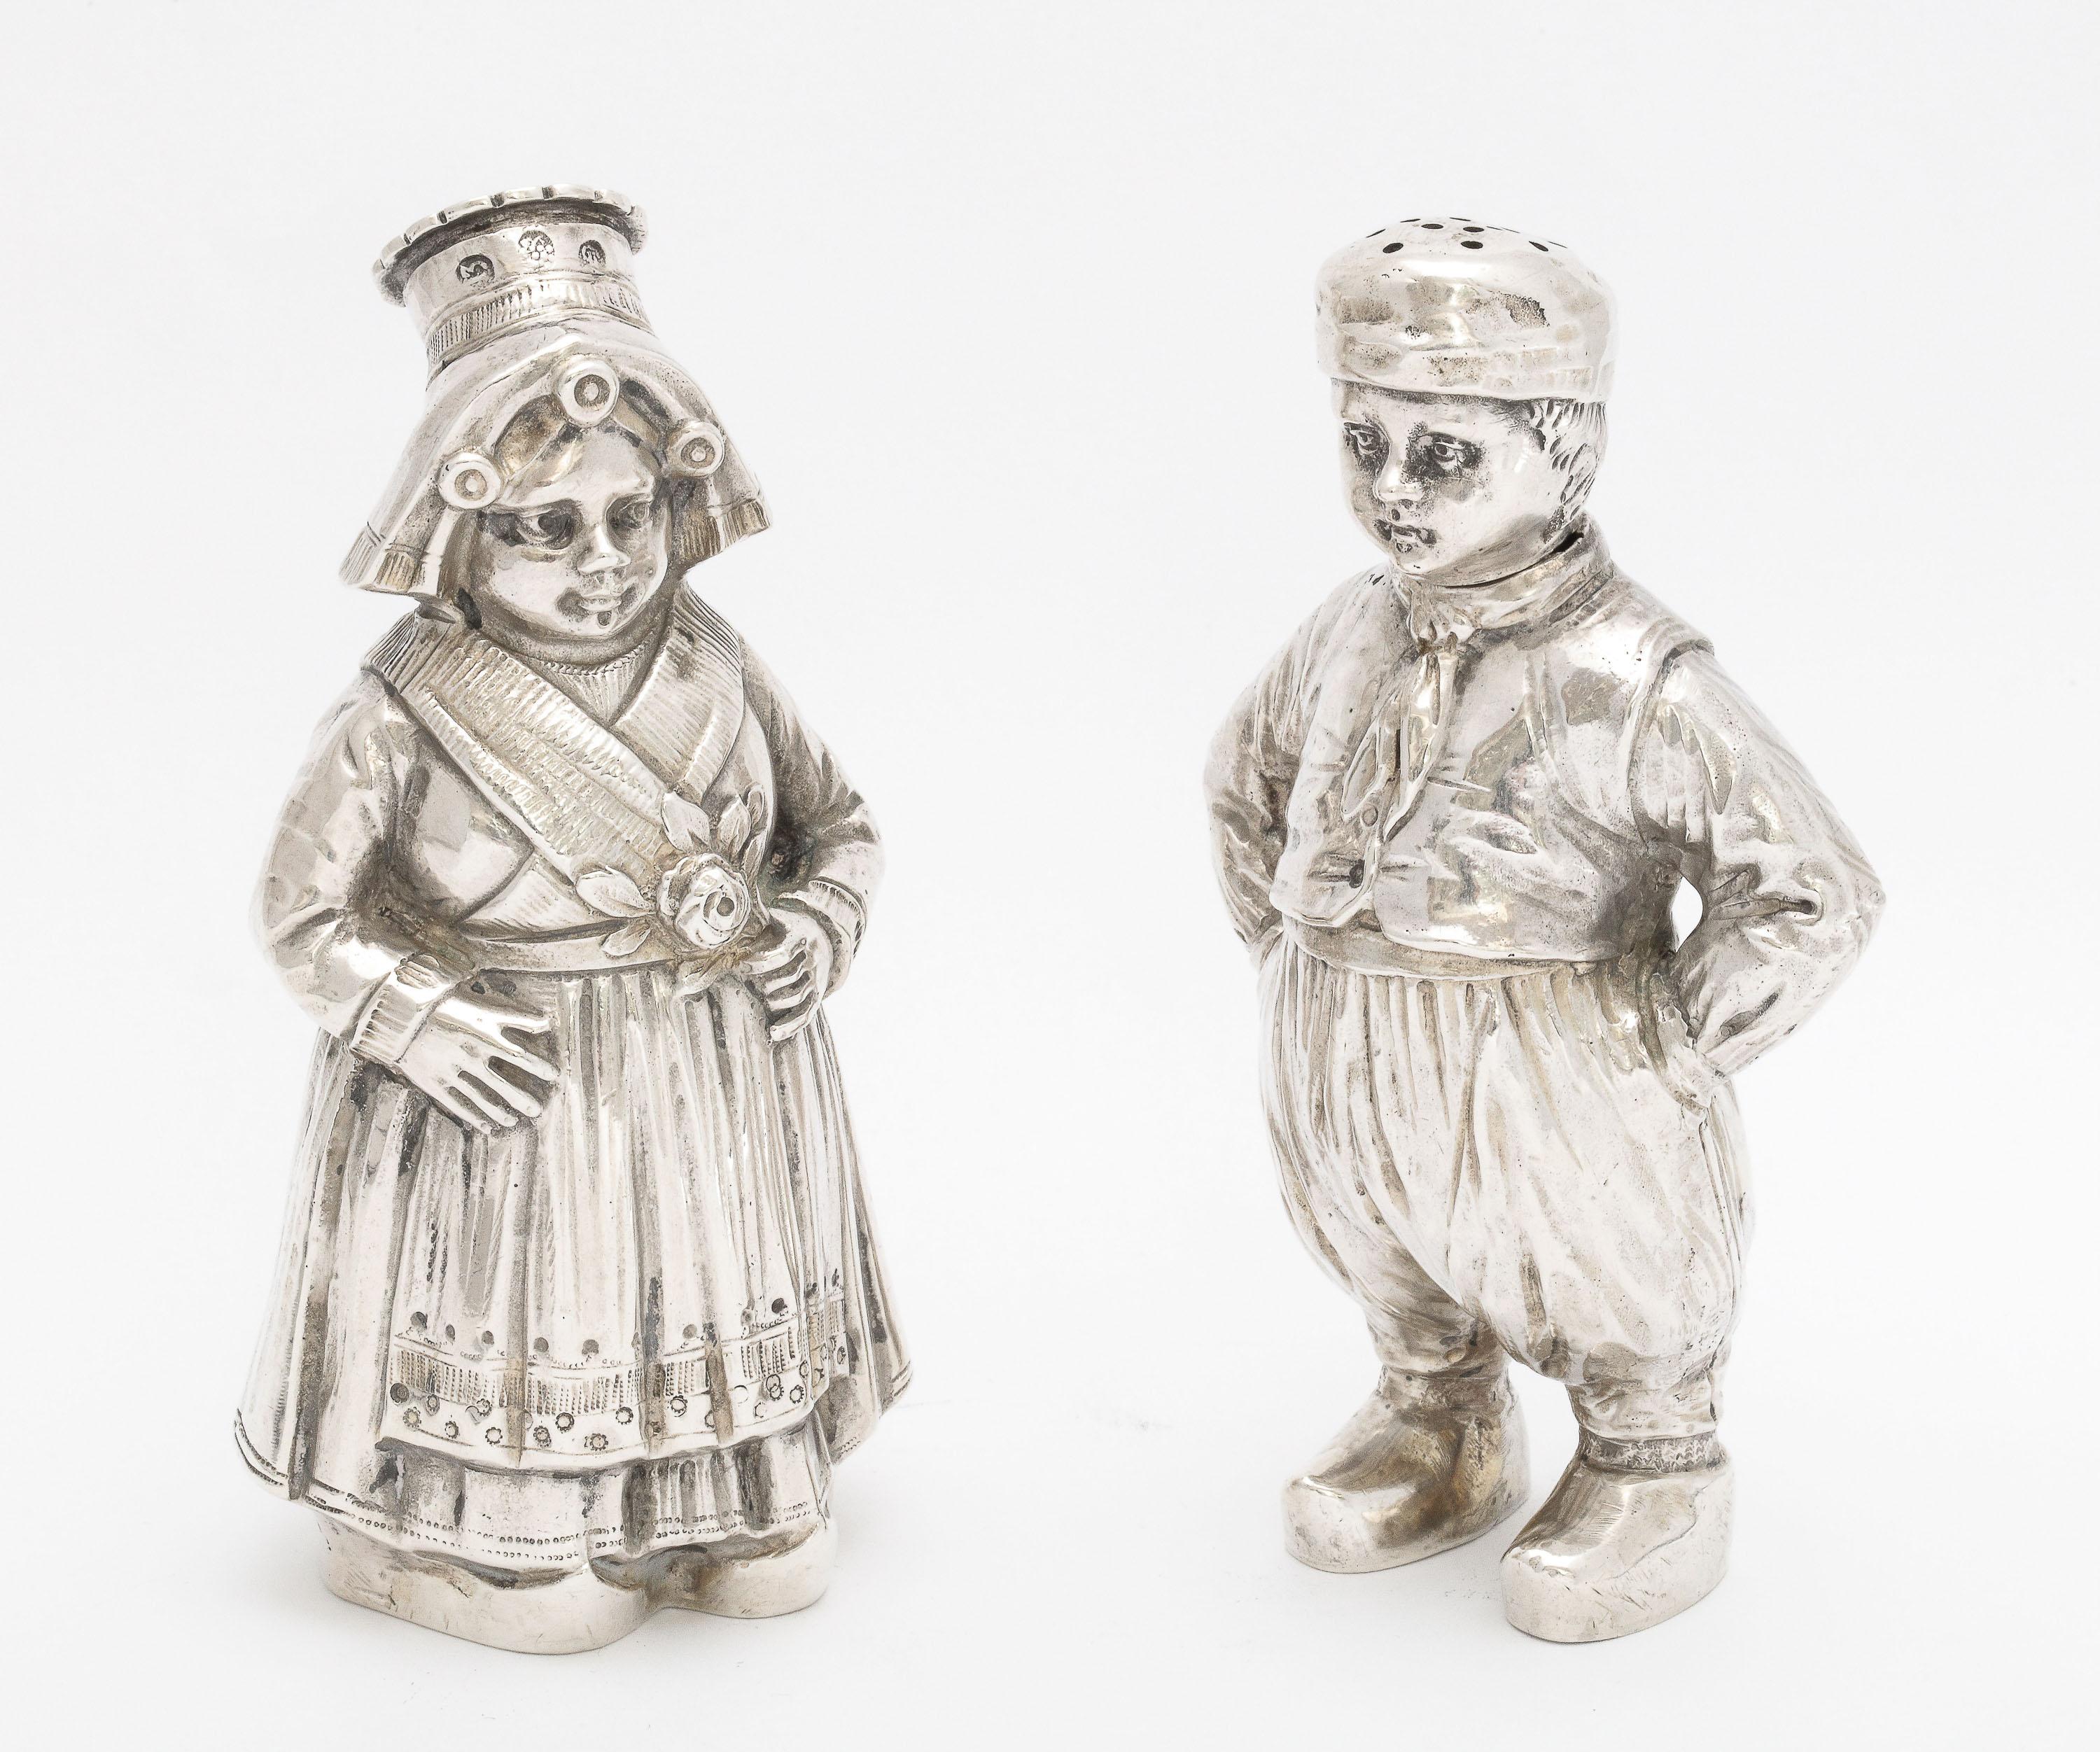 Edwardian Pair of Continental Silver '.835' Dutch Boy and Girl Salt and Pepper Shakers